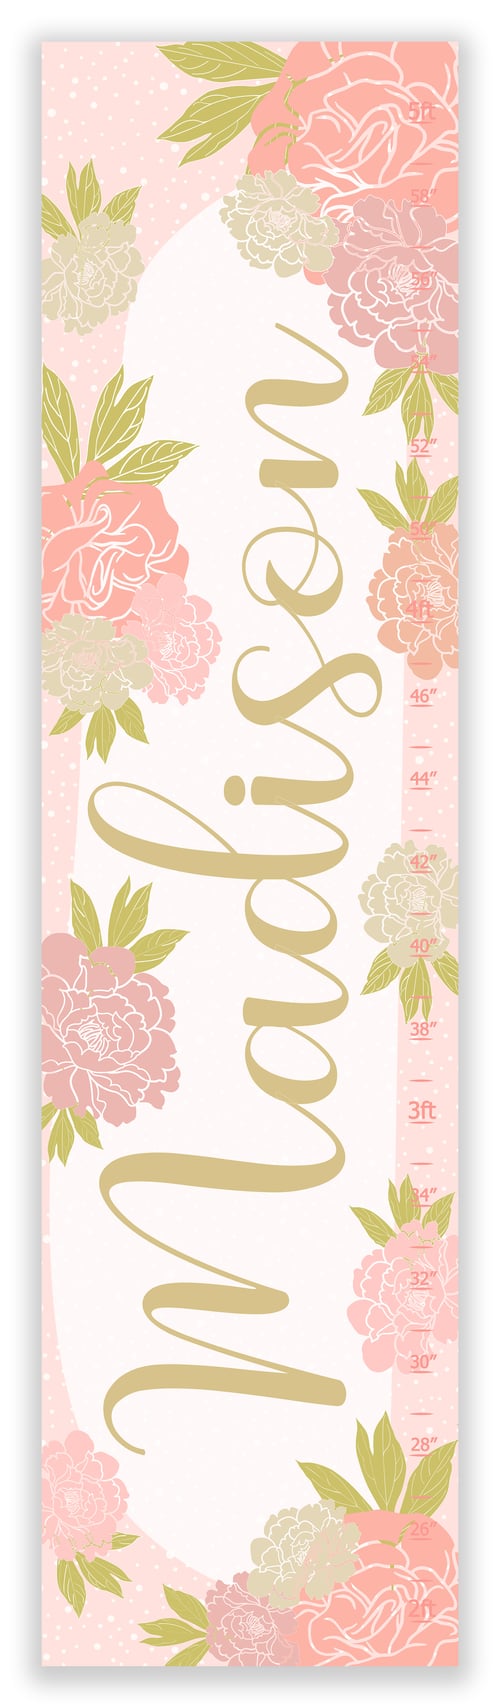 Image of Blush and Gold Calligraphy Name with Peonies - Personalized Canvas Growth Chart